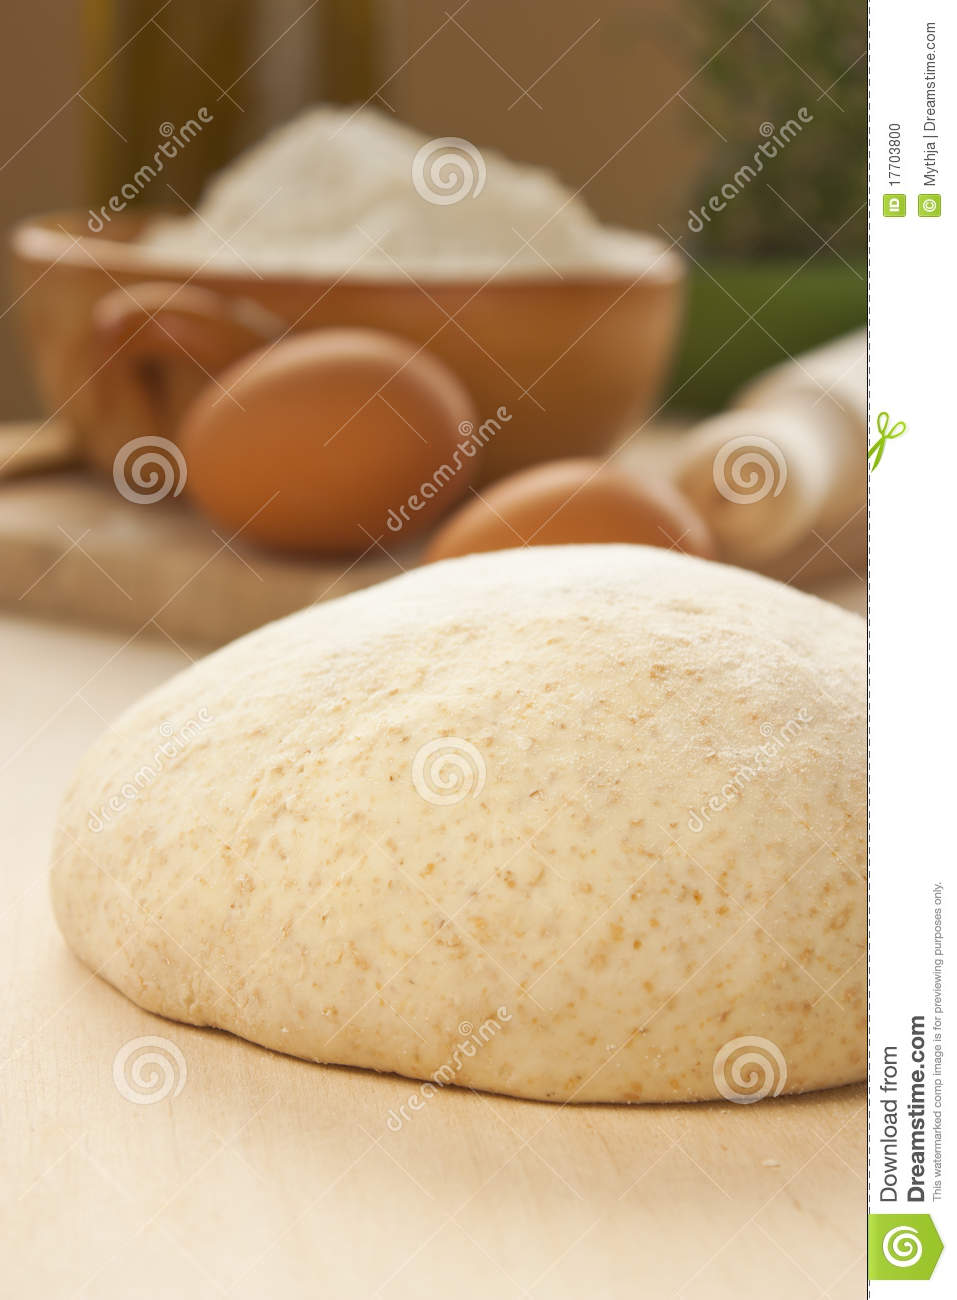 More Similar Stock Images Of   Ball Of Homemade Dough